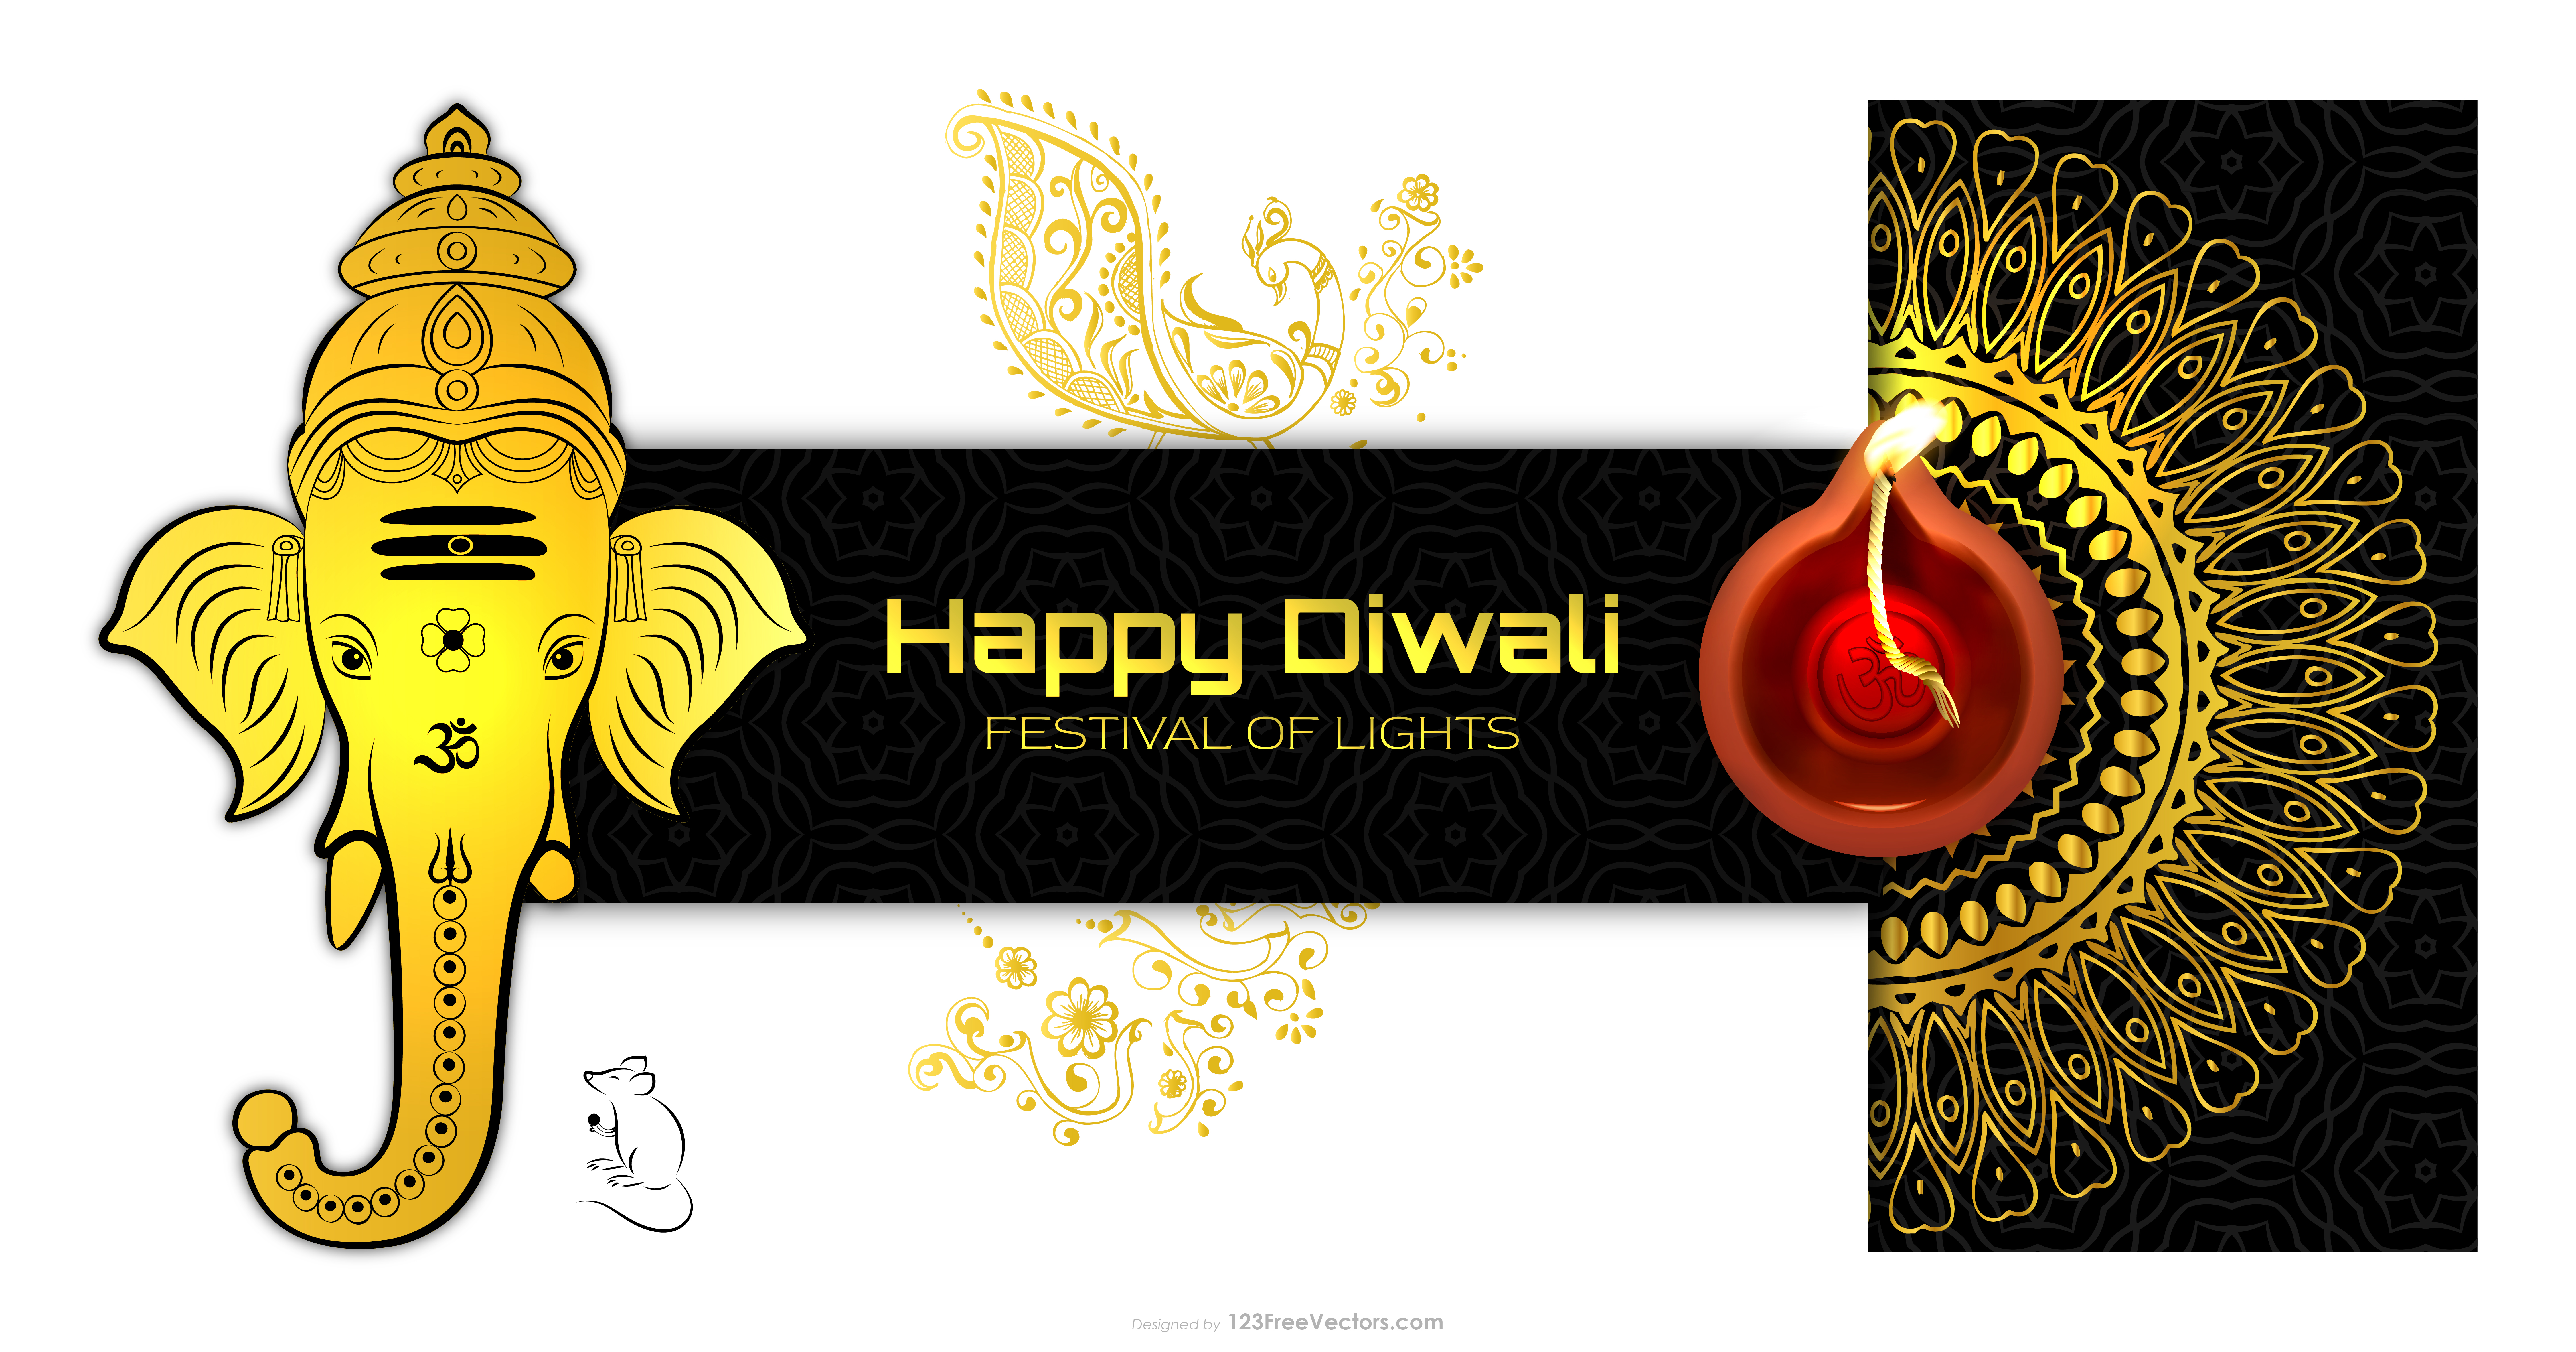 Happy Diwali Greeting Cards Design 2 iPhone Wallpapers Free Download